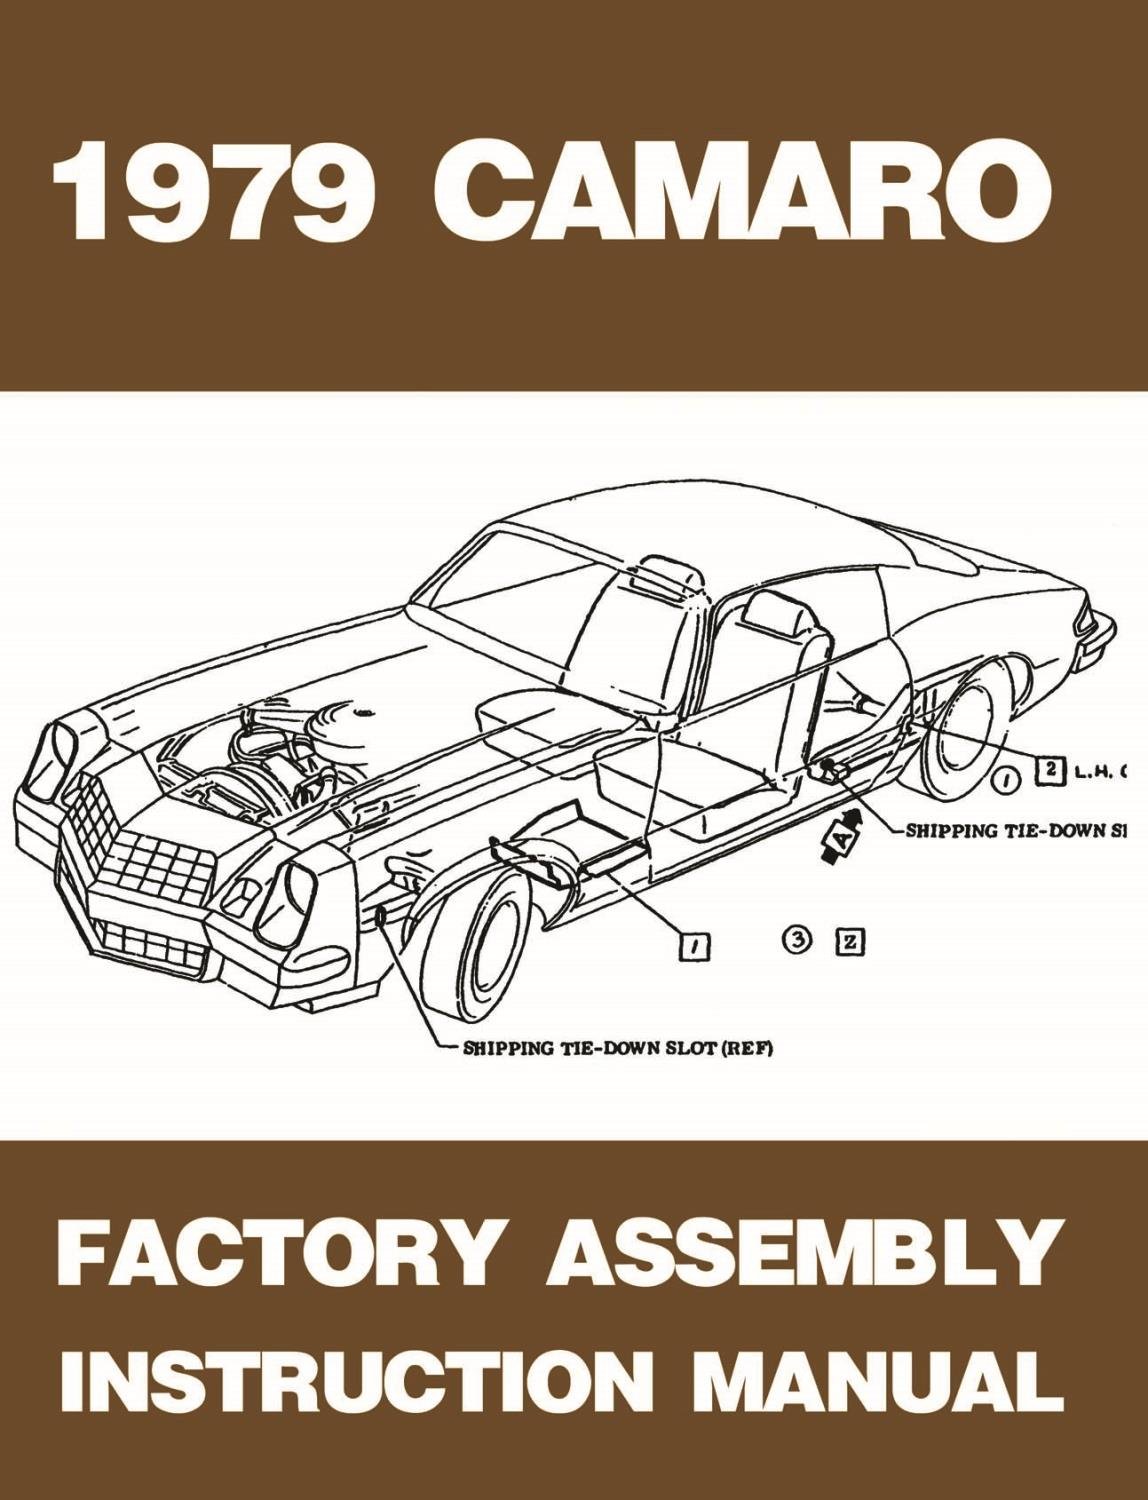 Factory Assembly Instruction Manual for 1979 Chevrolet Camaro